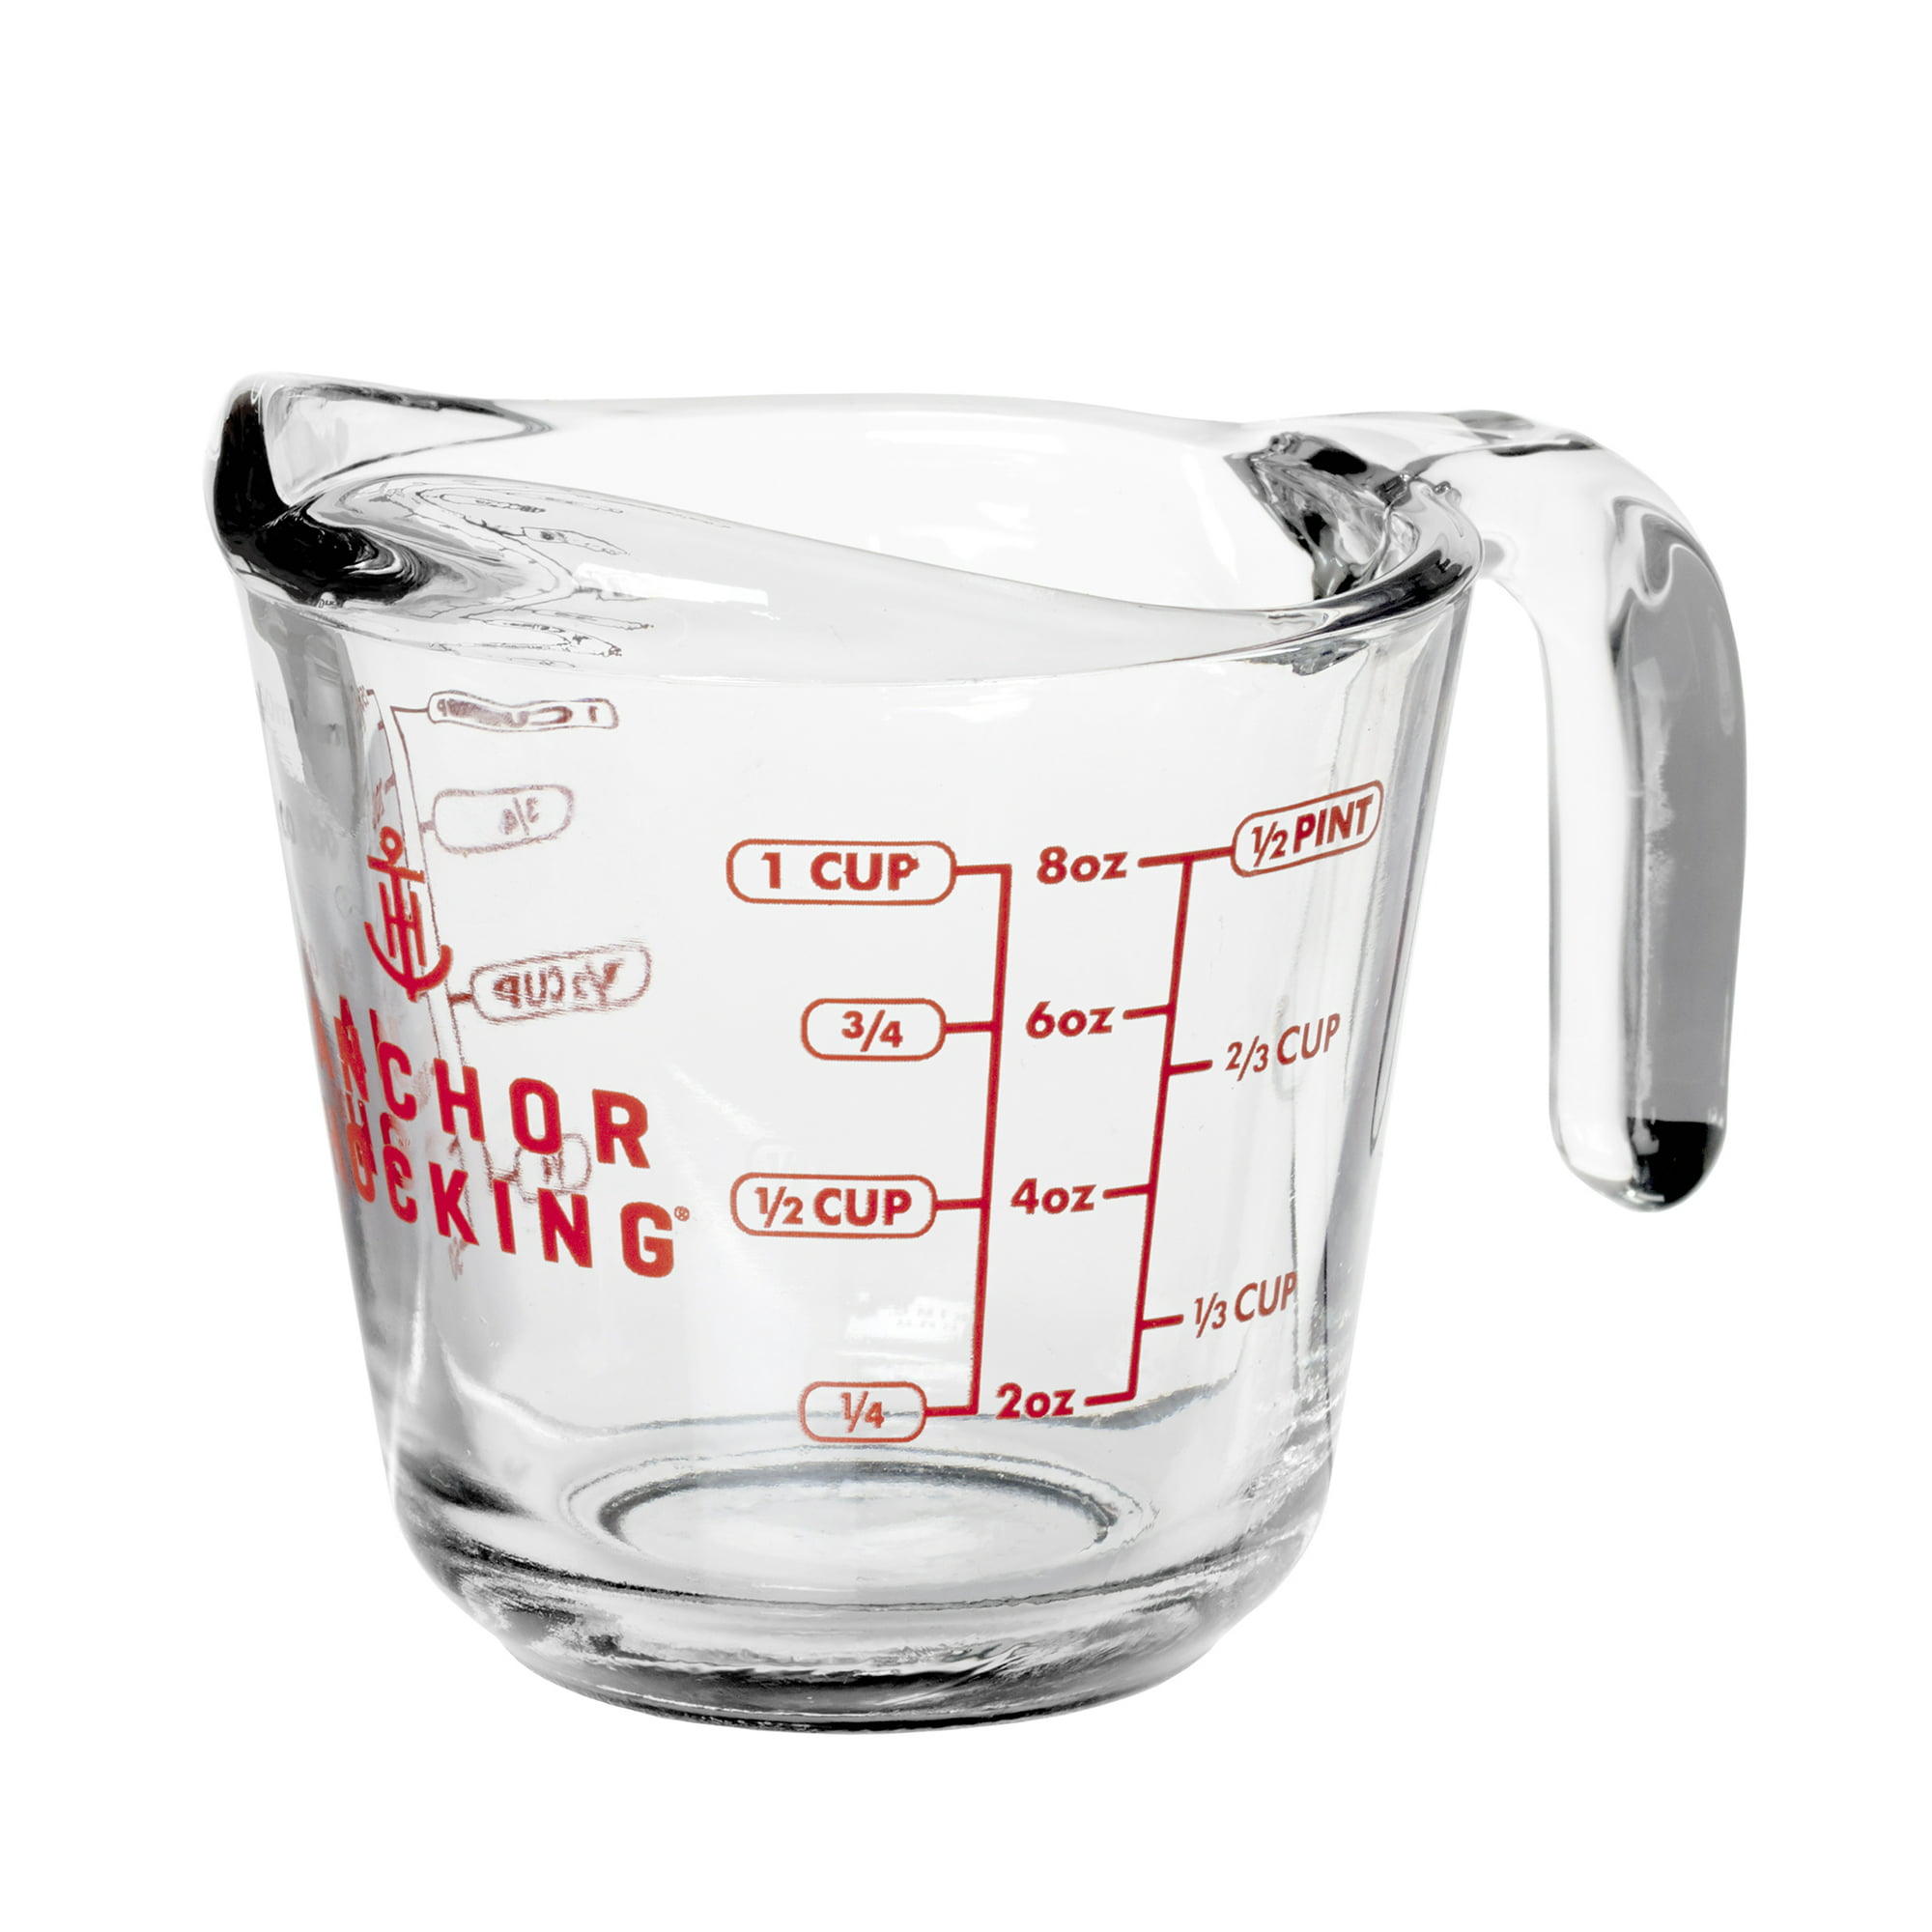 Anchor Hocking Glass Measuring Cup, 1 Cup